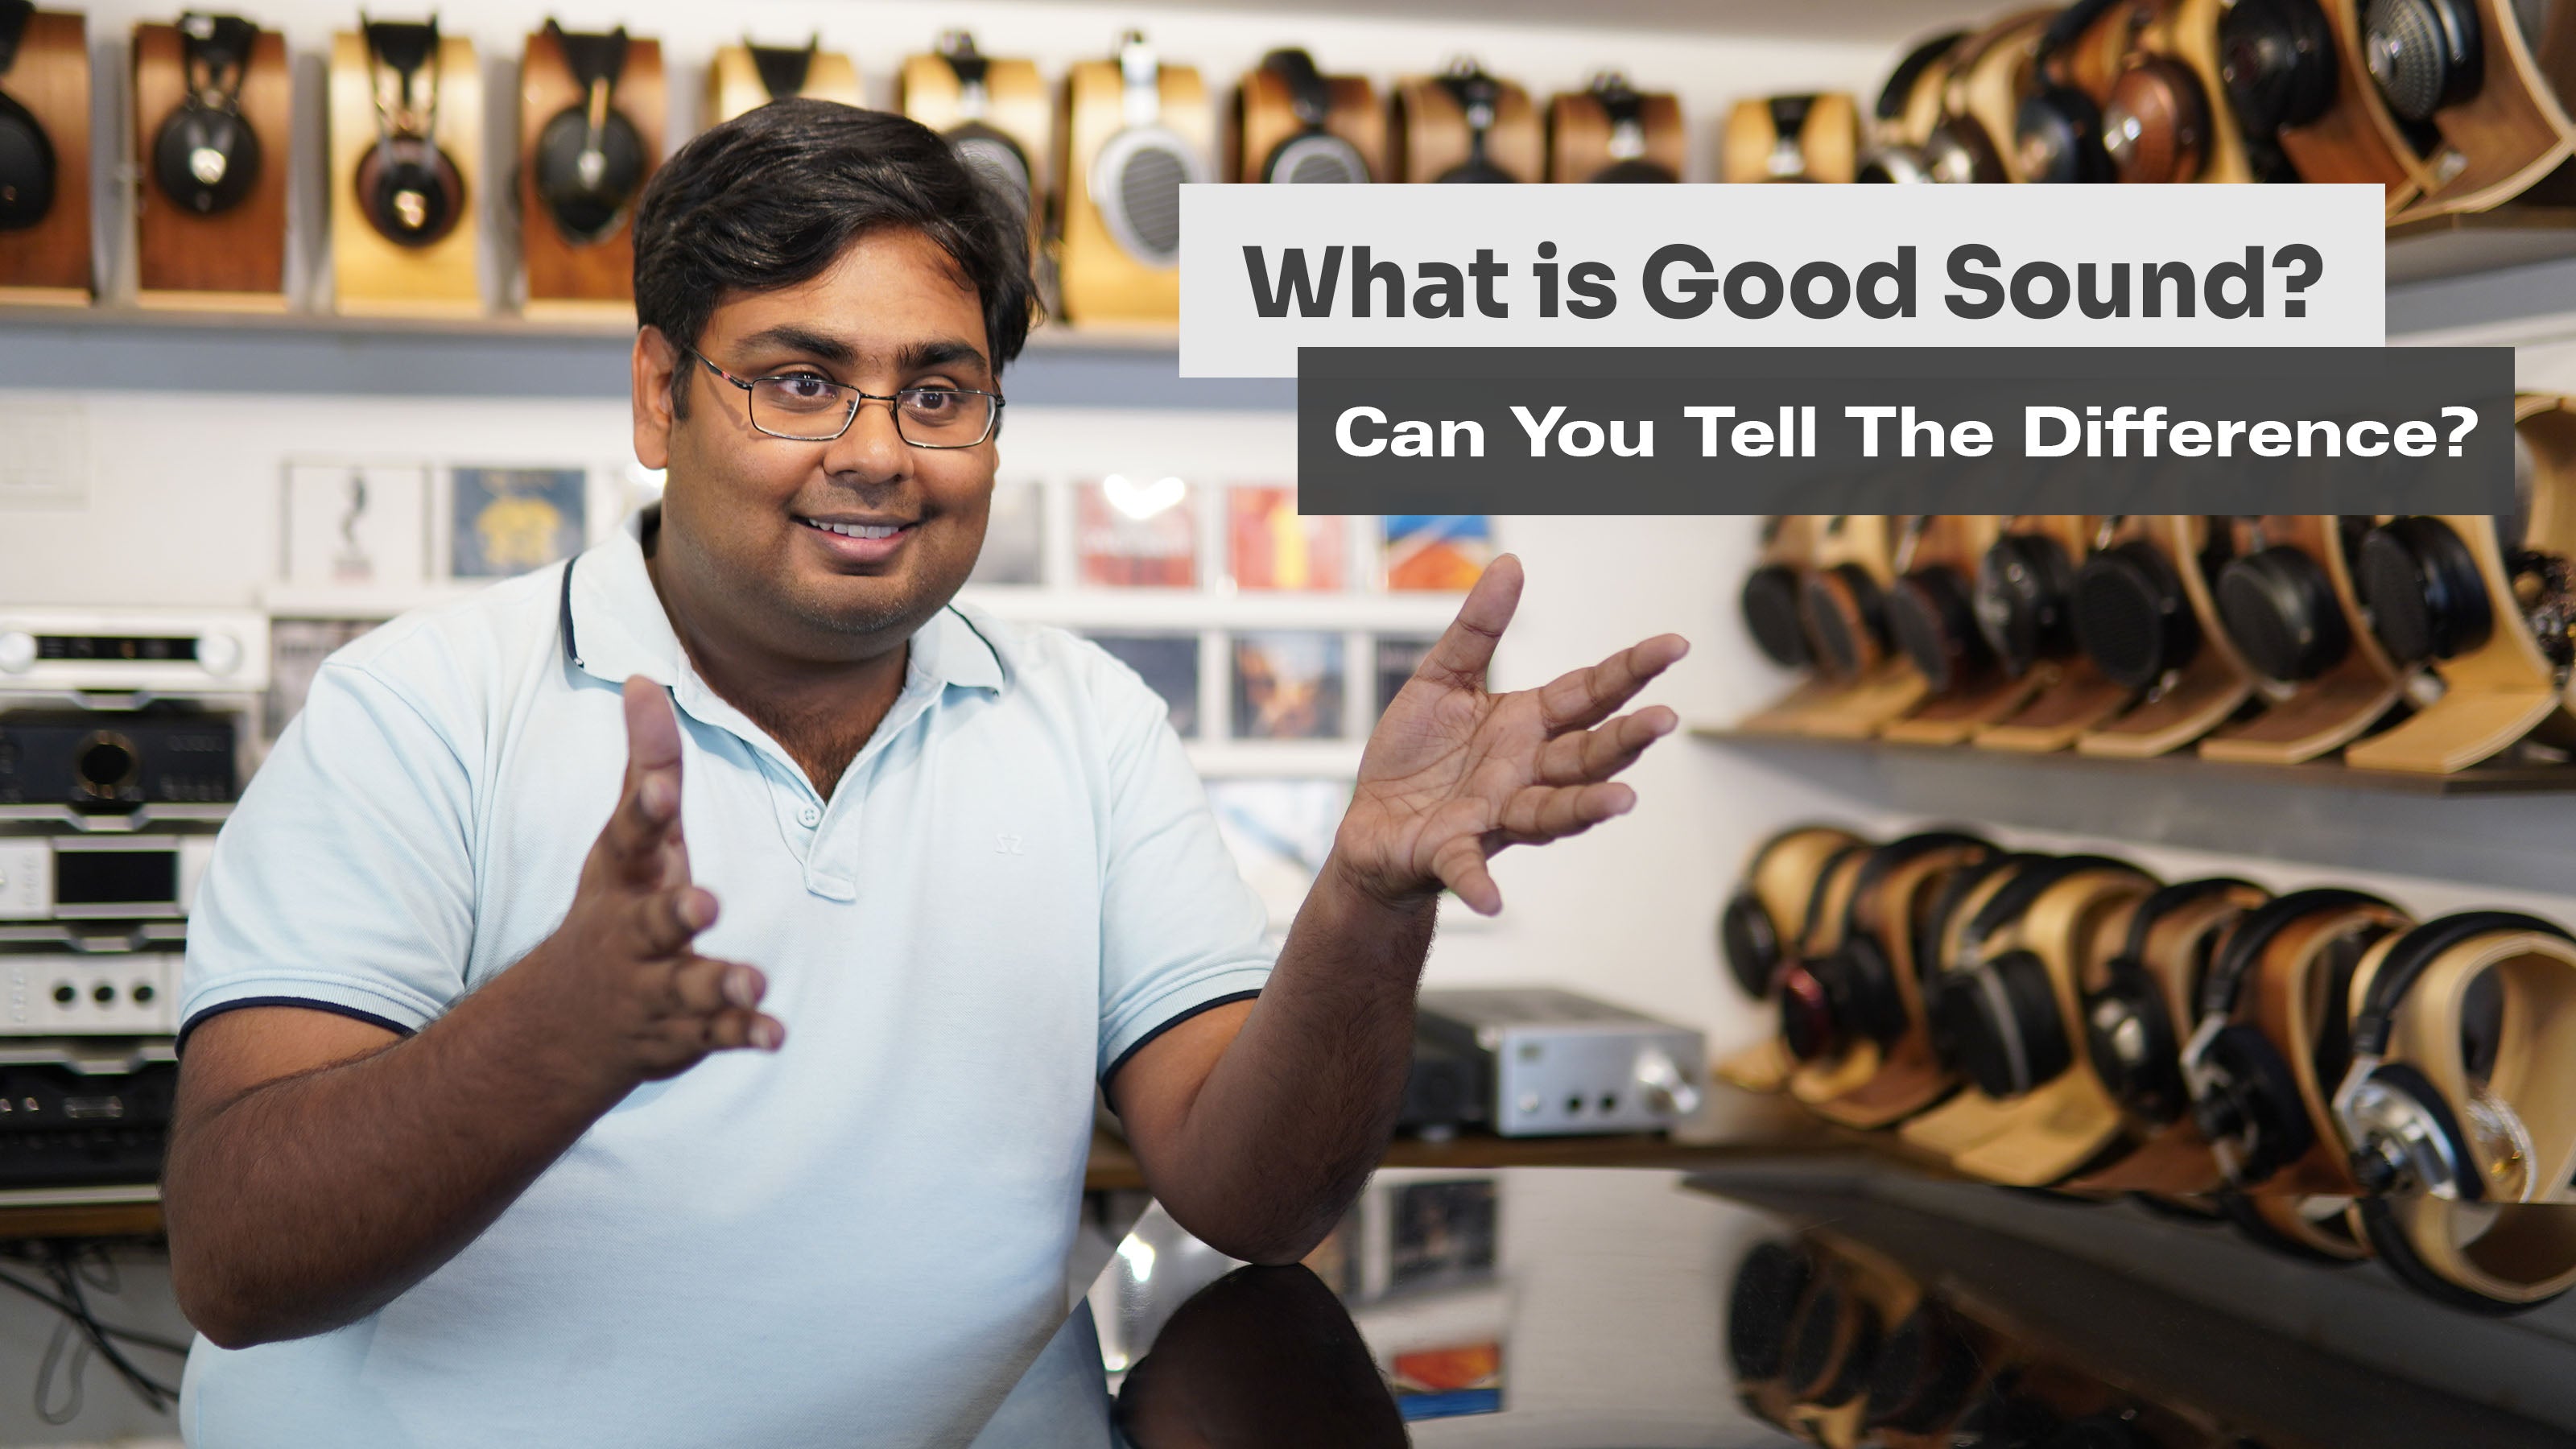 What is Good Sound? And, How can you tell the difference?